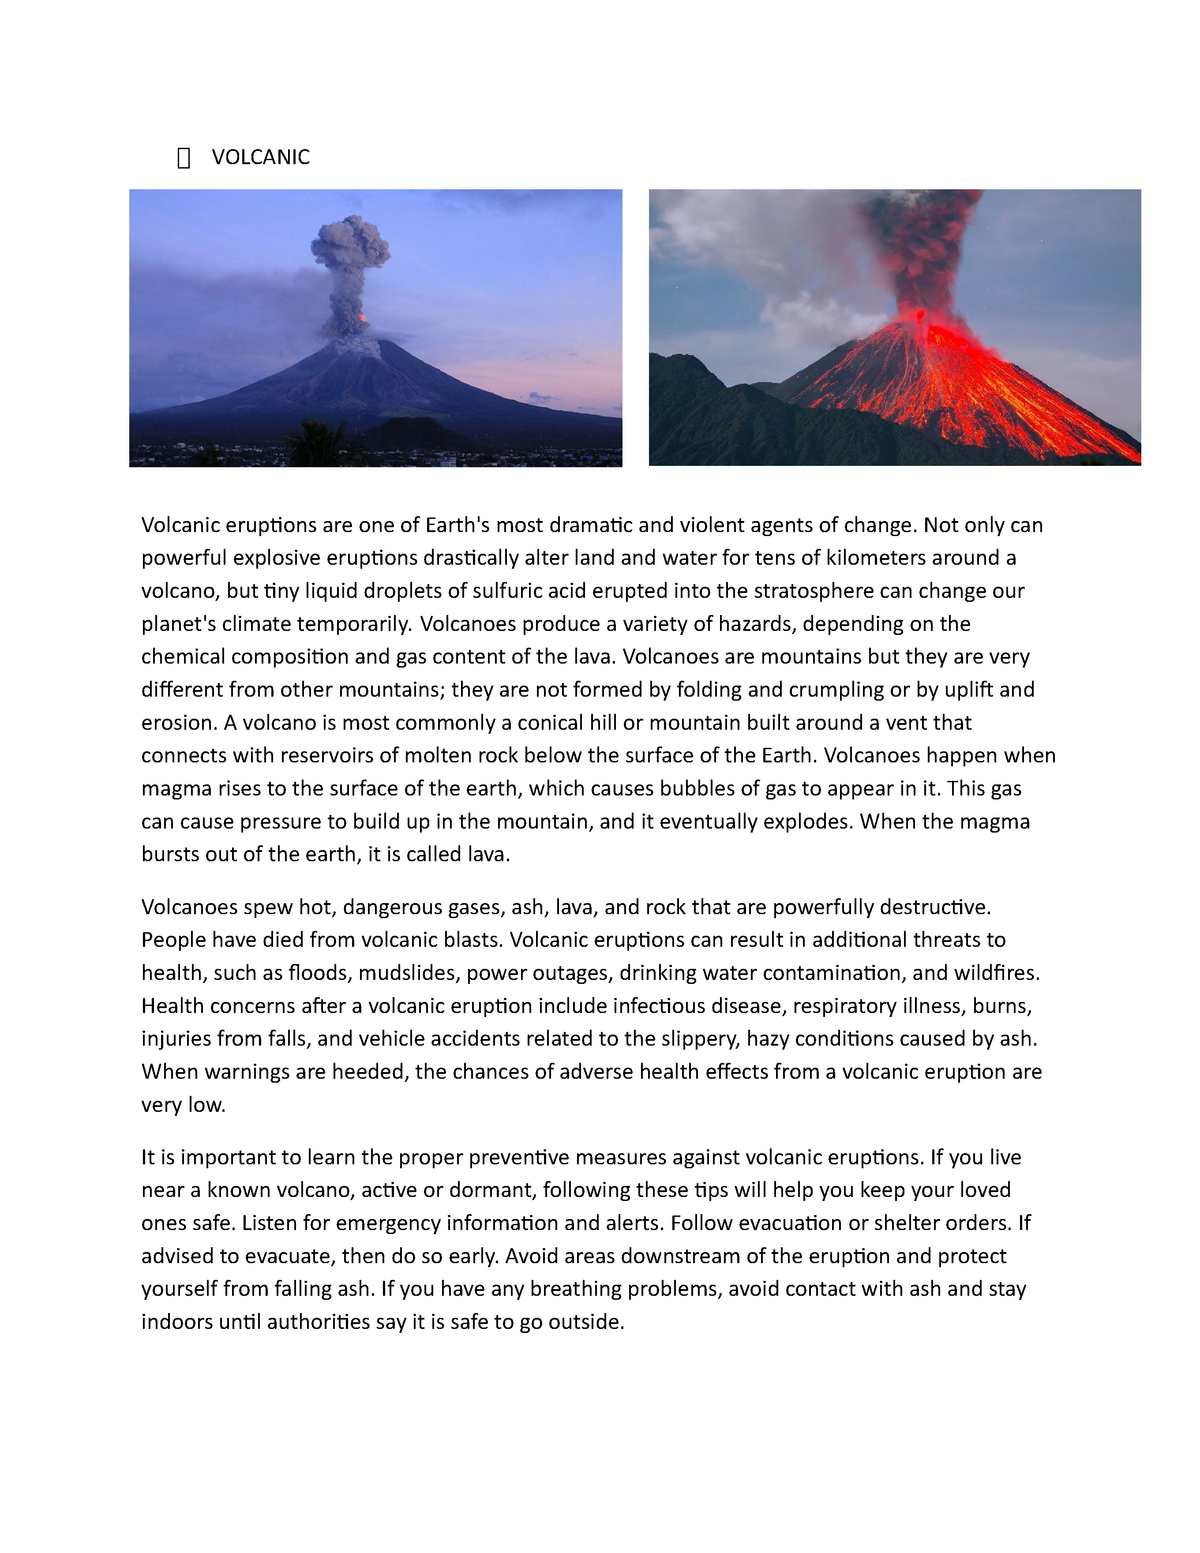 an essay about volcano